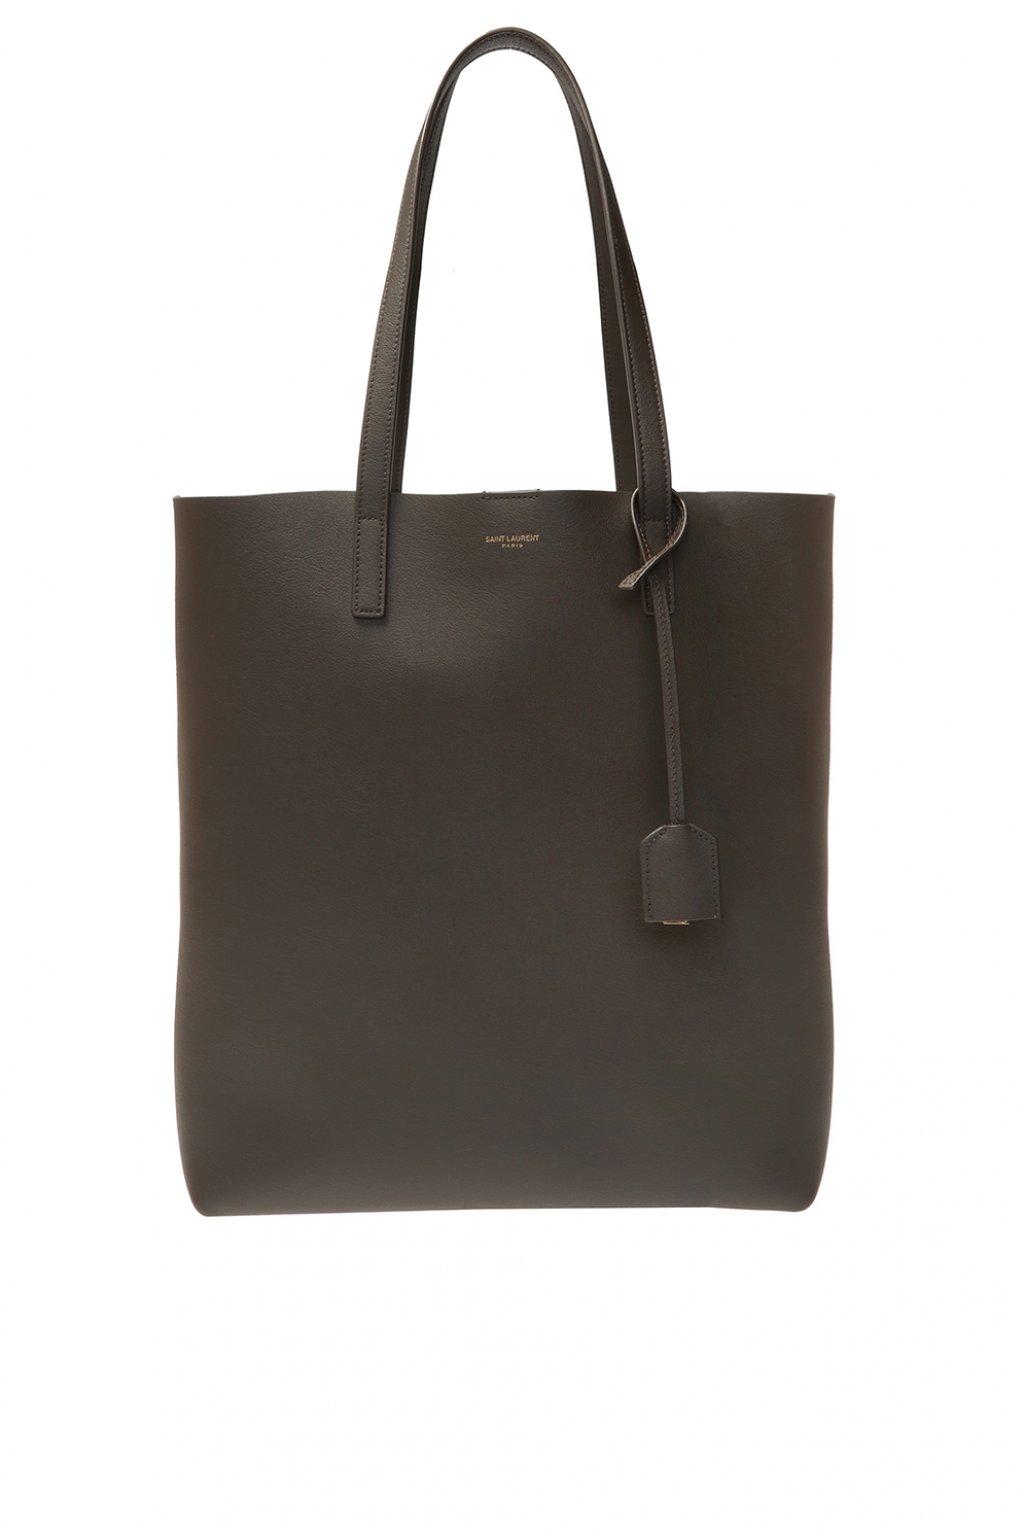 Saint Laurent Leather Shopping Bag Toy in Grey (Gray) | Lyst